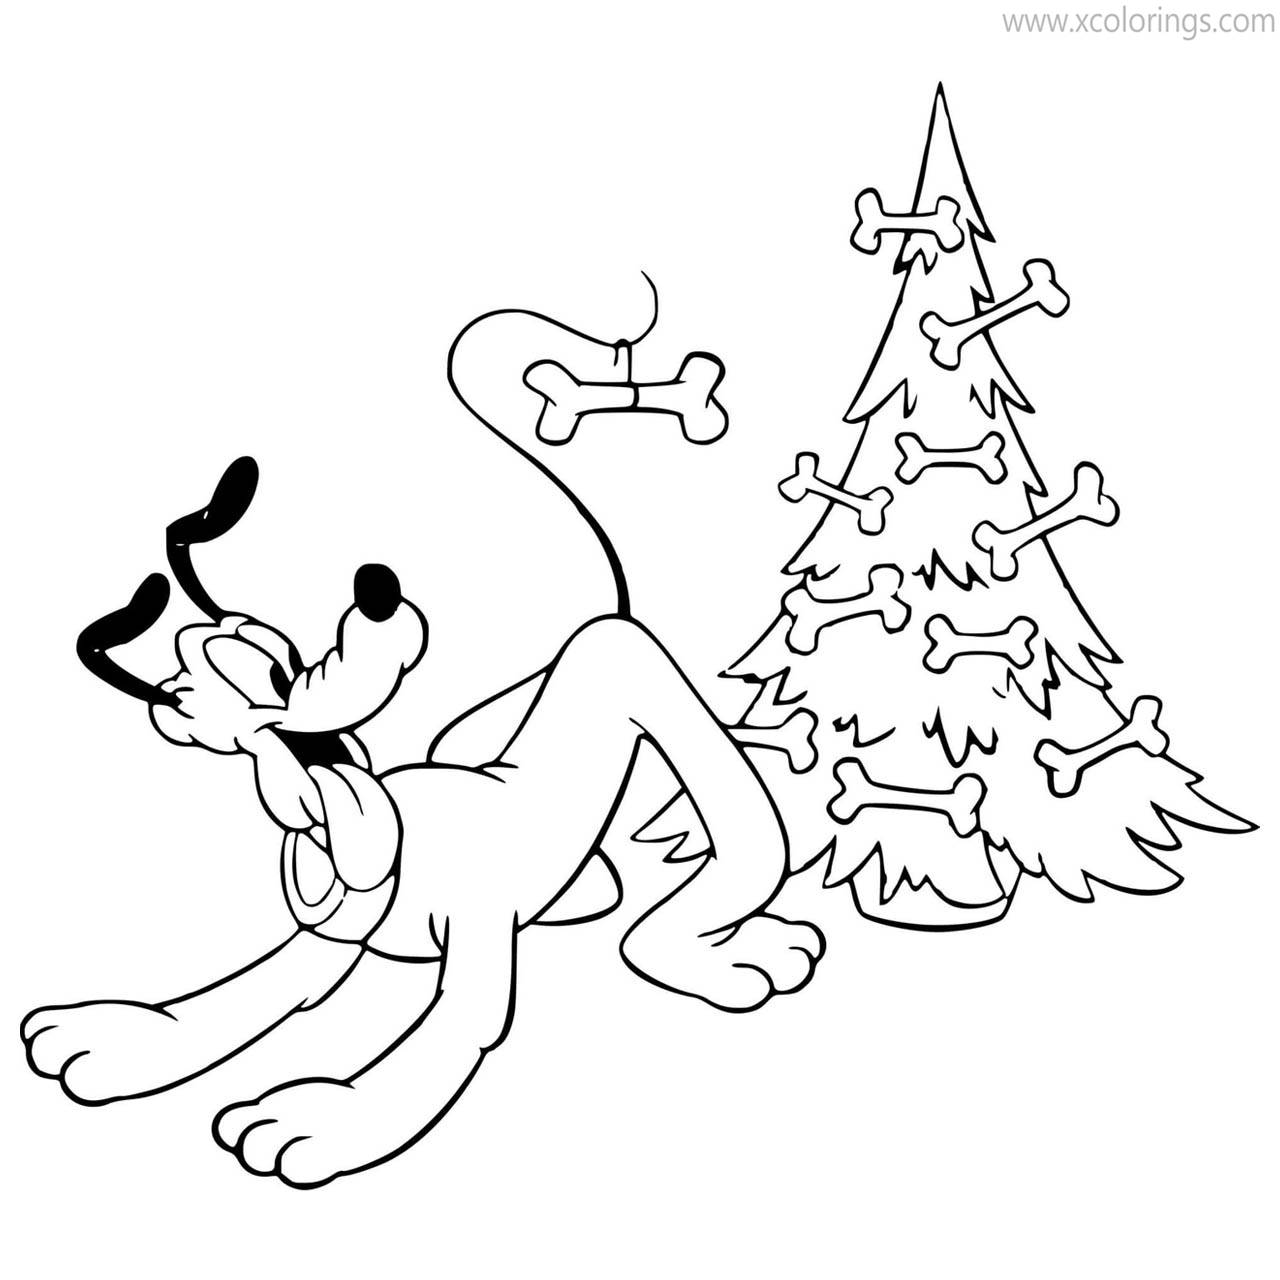 Free Mickey Mouse Christmas Coloring Pages Pluto Christmas Tree With Bones printable